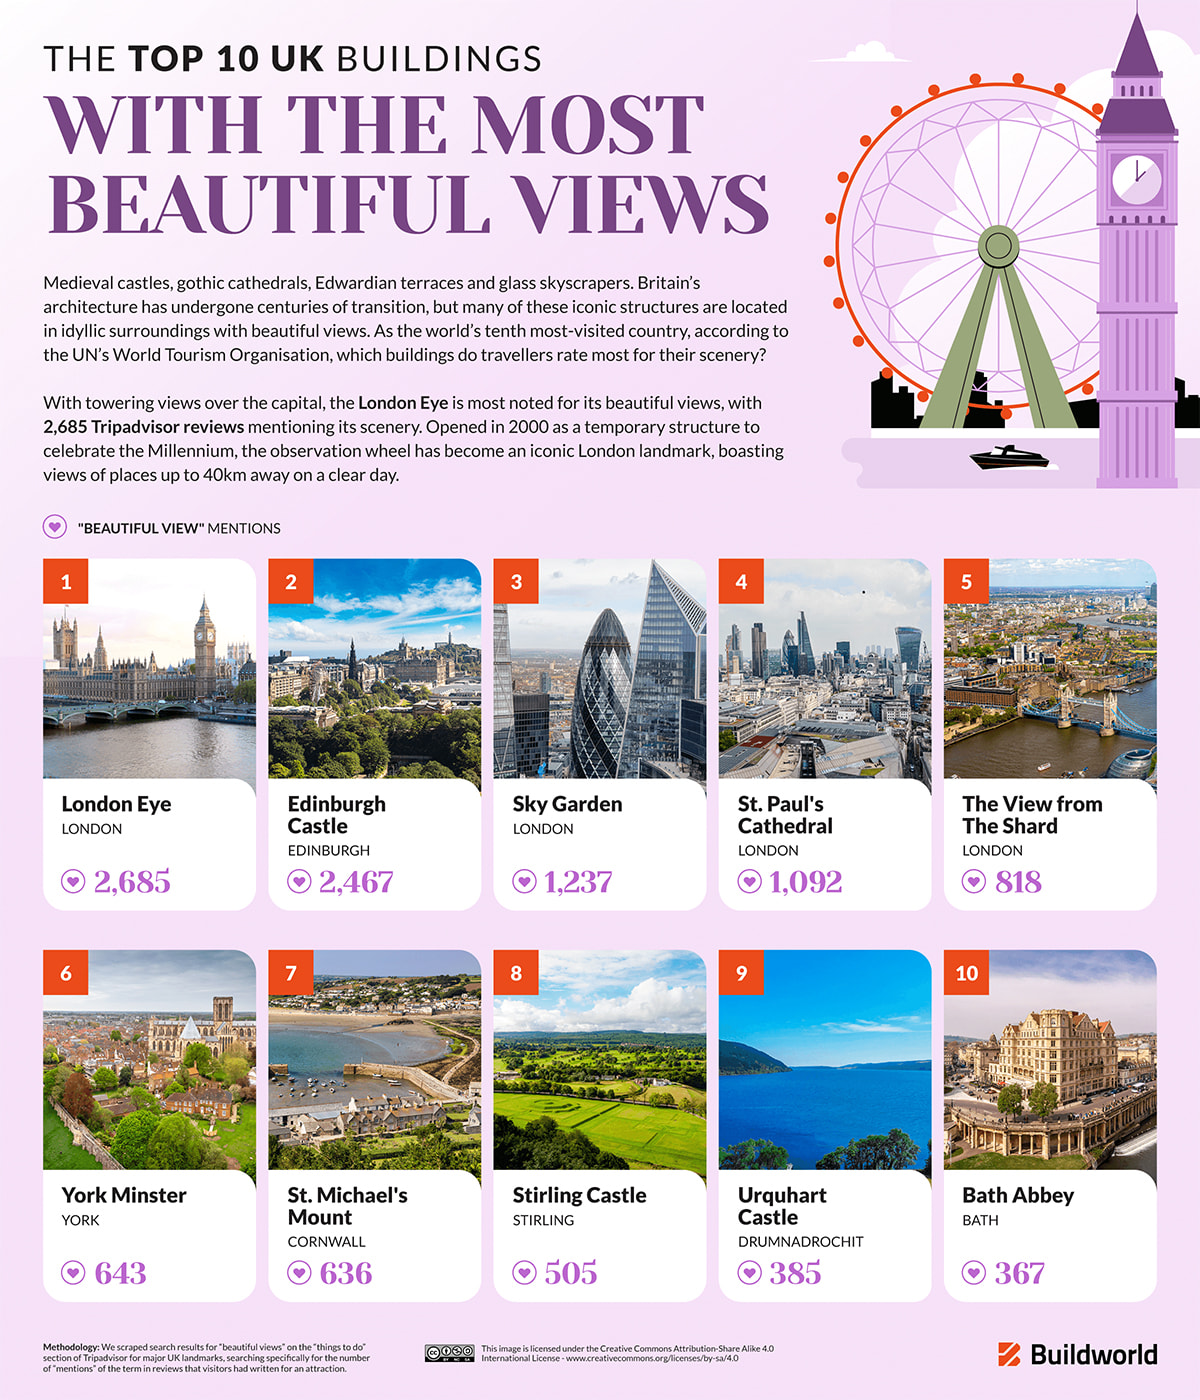 The Top 10 UK Buildings With the Most Beautiful Views